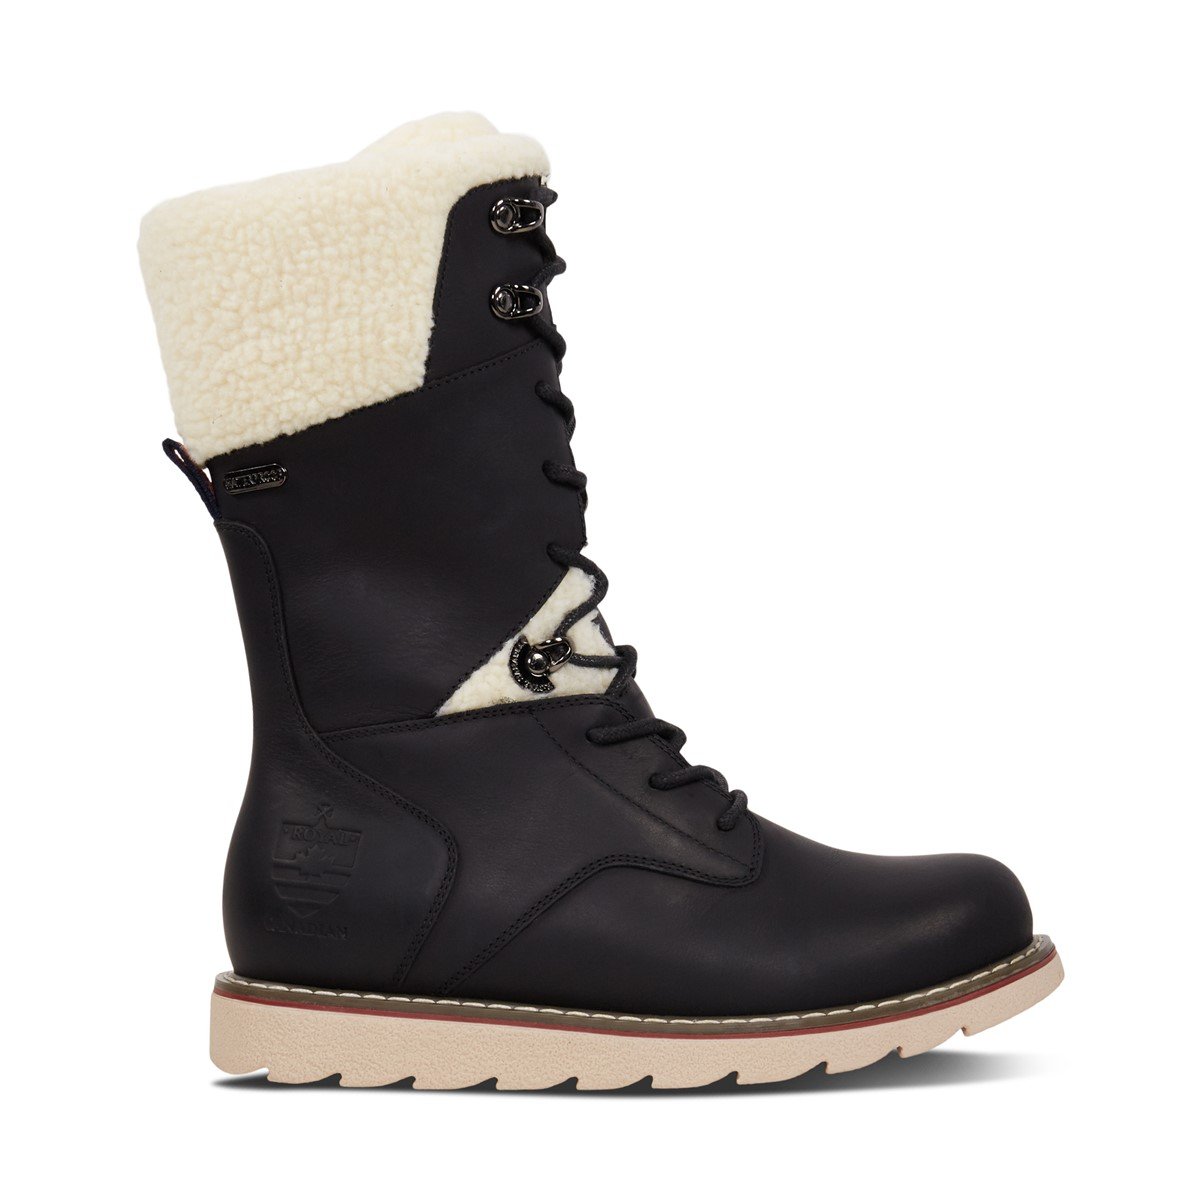 Women's Chambly Tall Winter Boots in Black